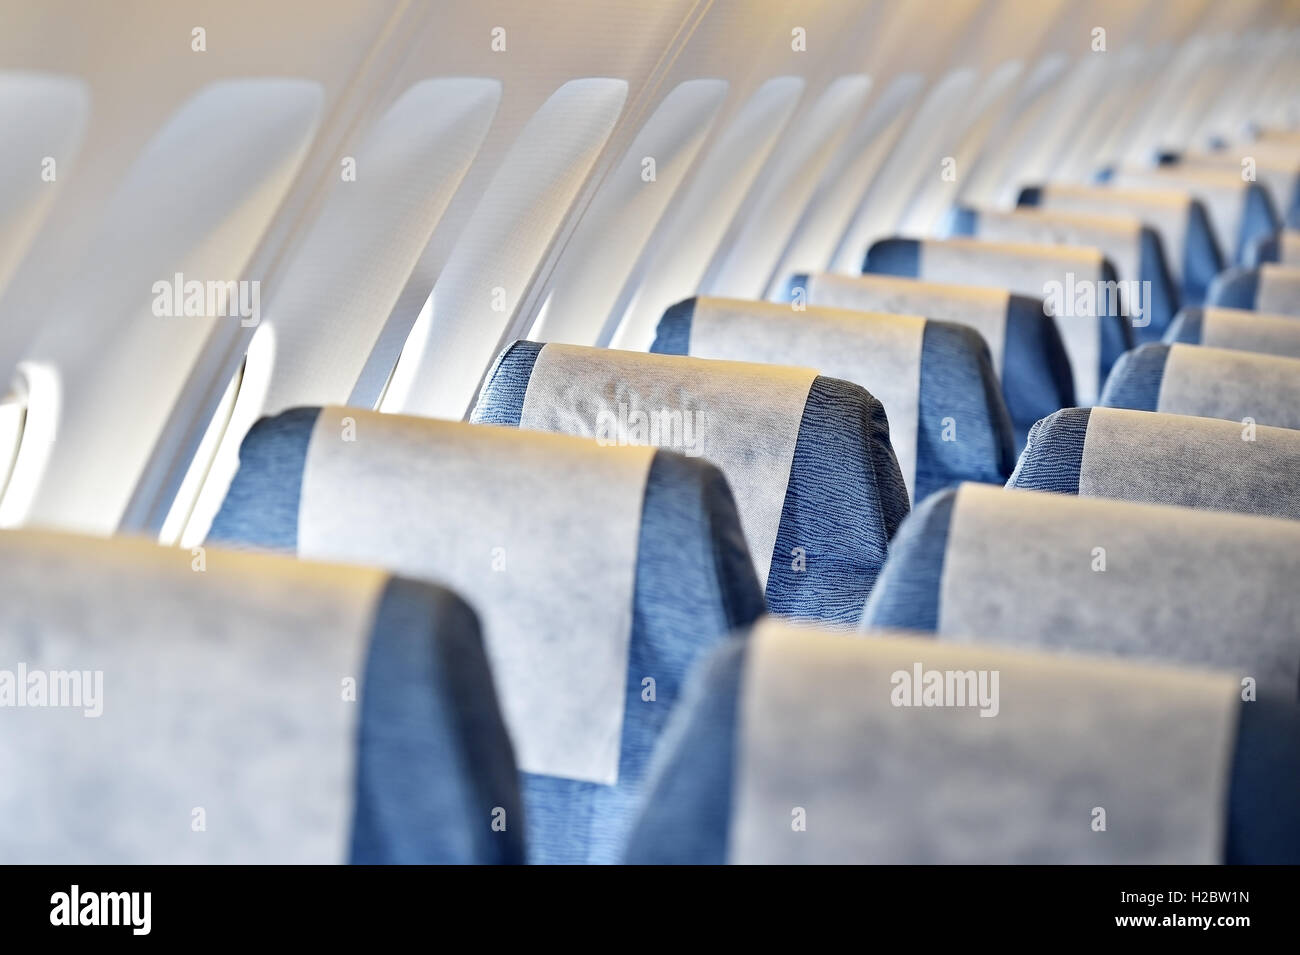 Blue airplane empty seats with new head rest covers Stock Photo